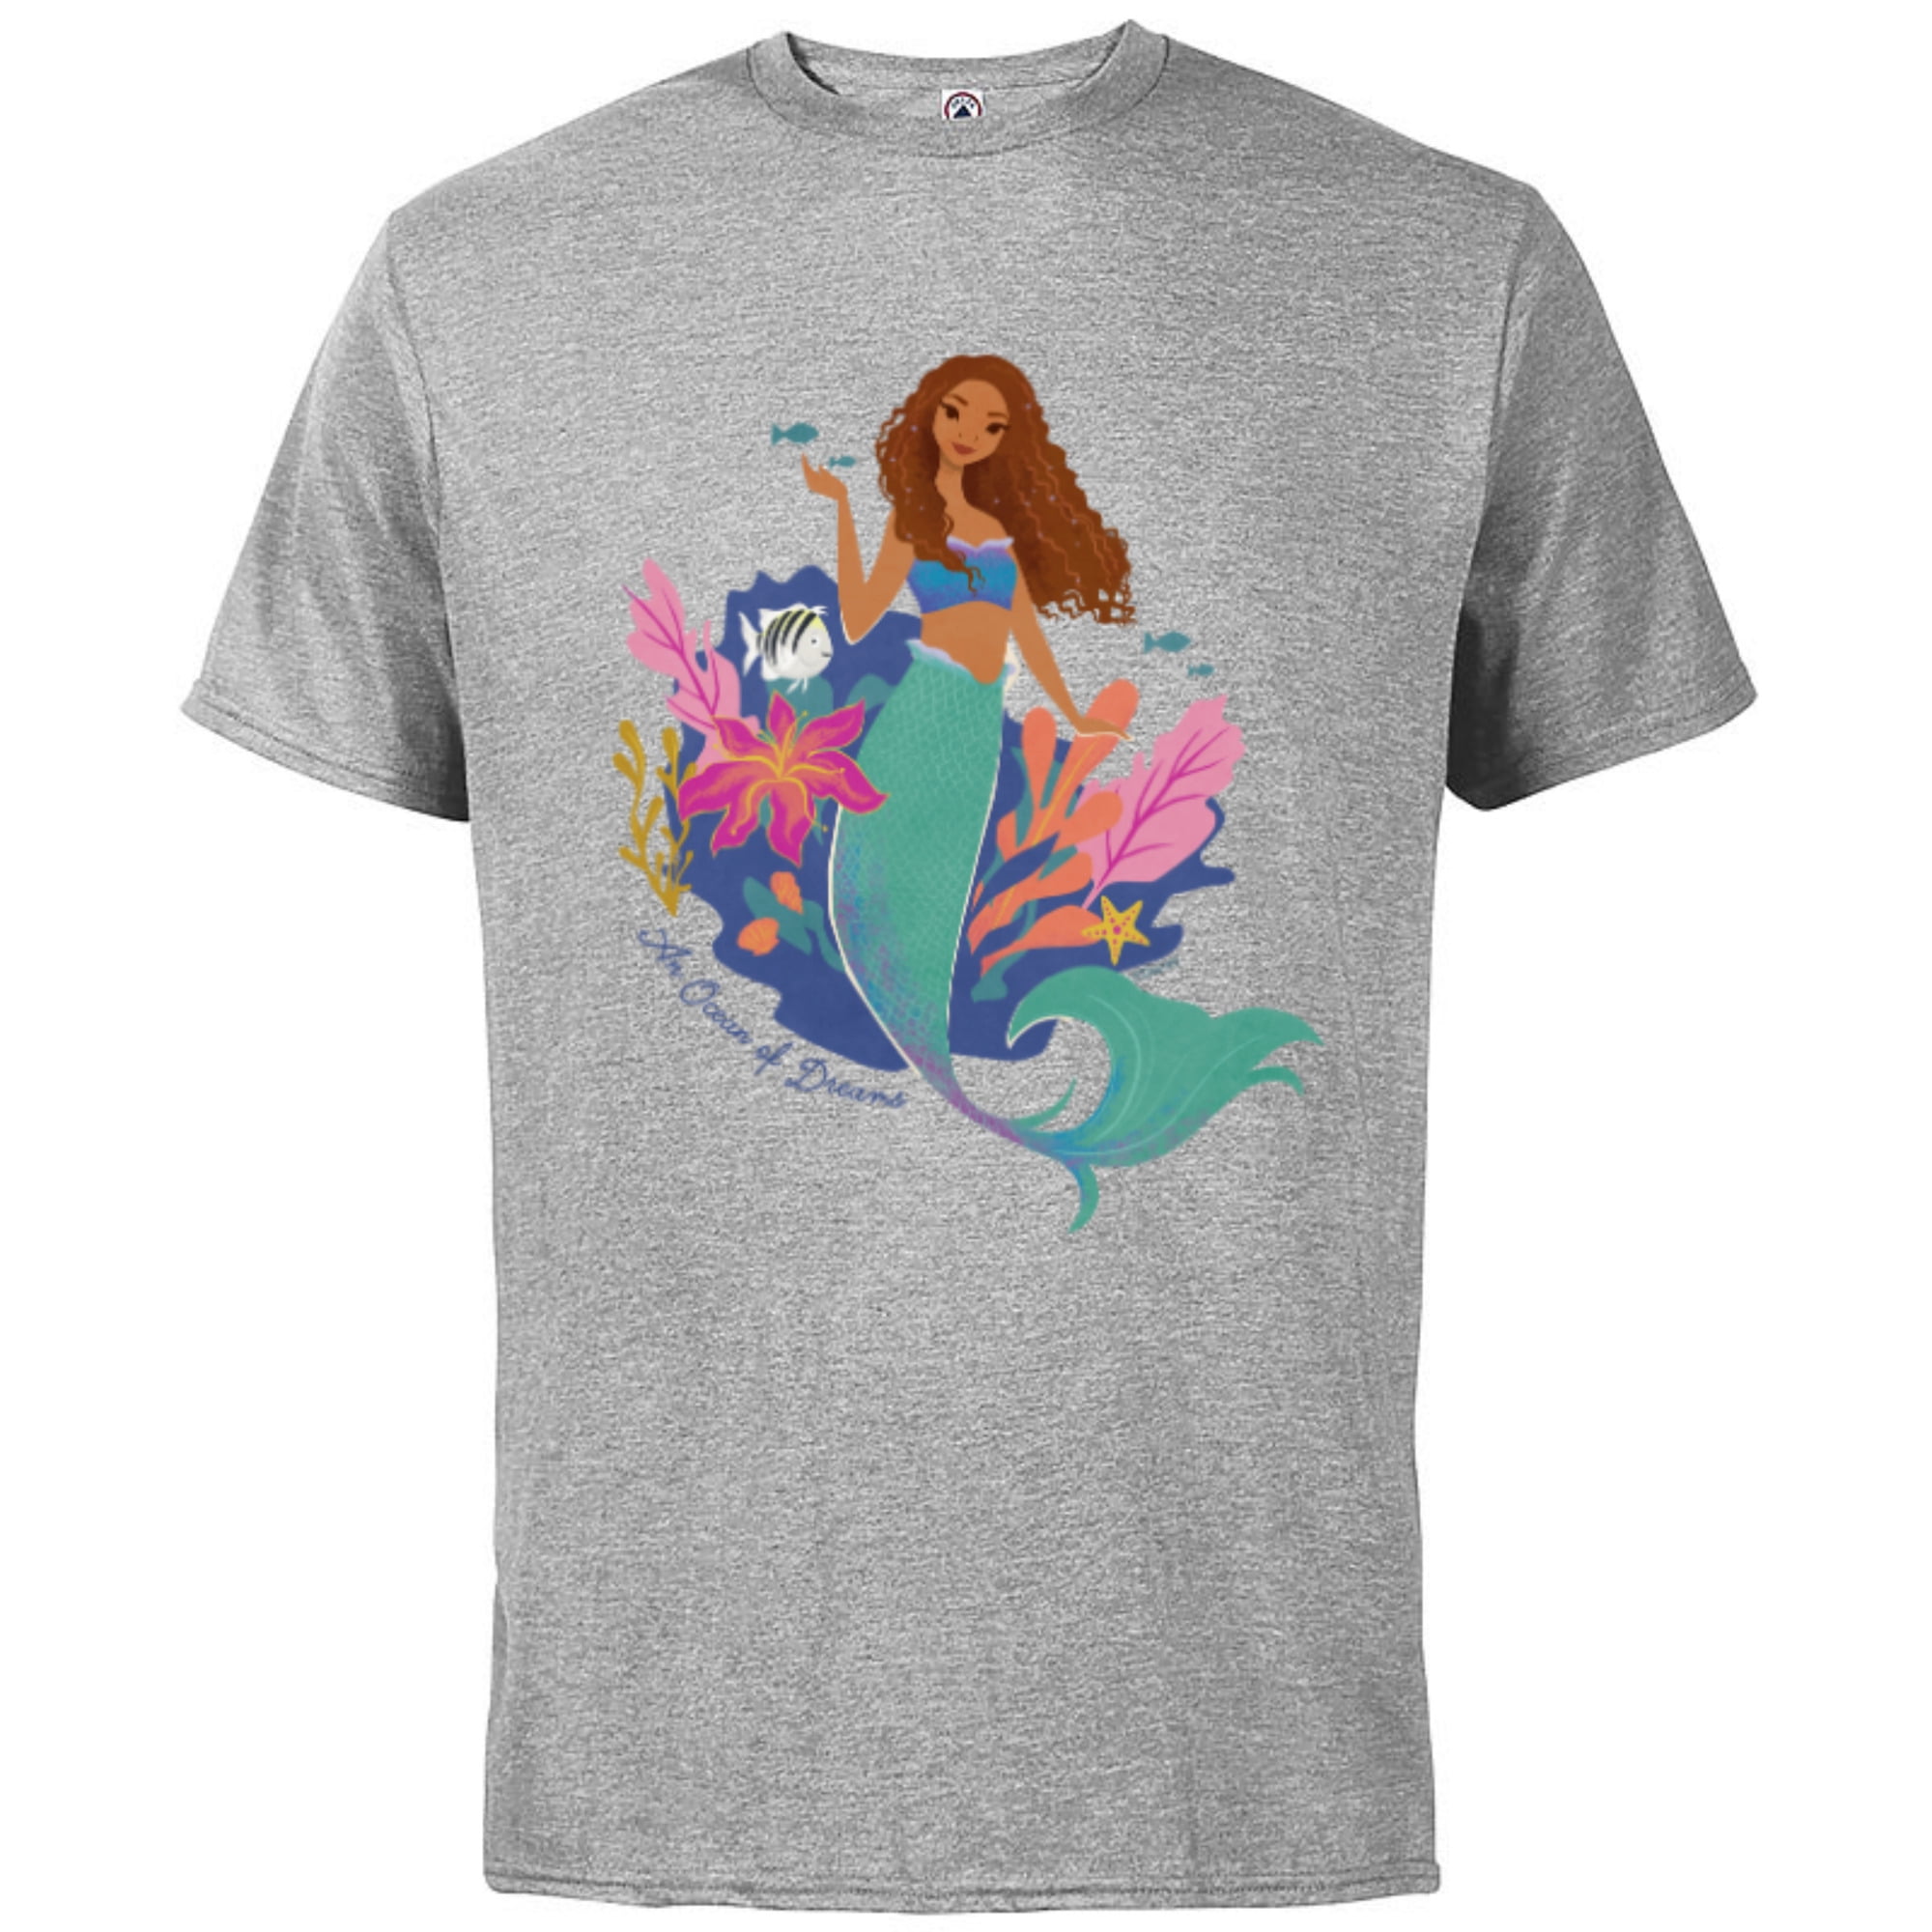 Shirt The Adults Dreams An Sleeve of Ariel Disney Little - Customized-Athletic Cotton Short T- Ocean Heather for - Mermaid